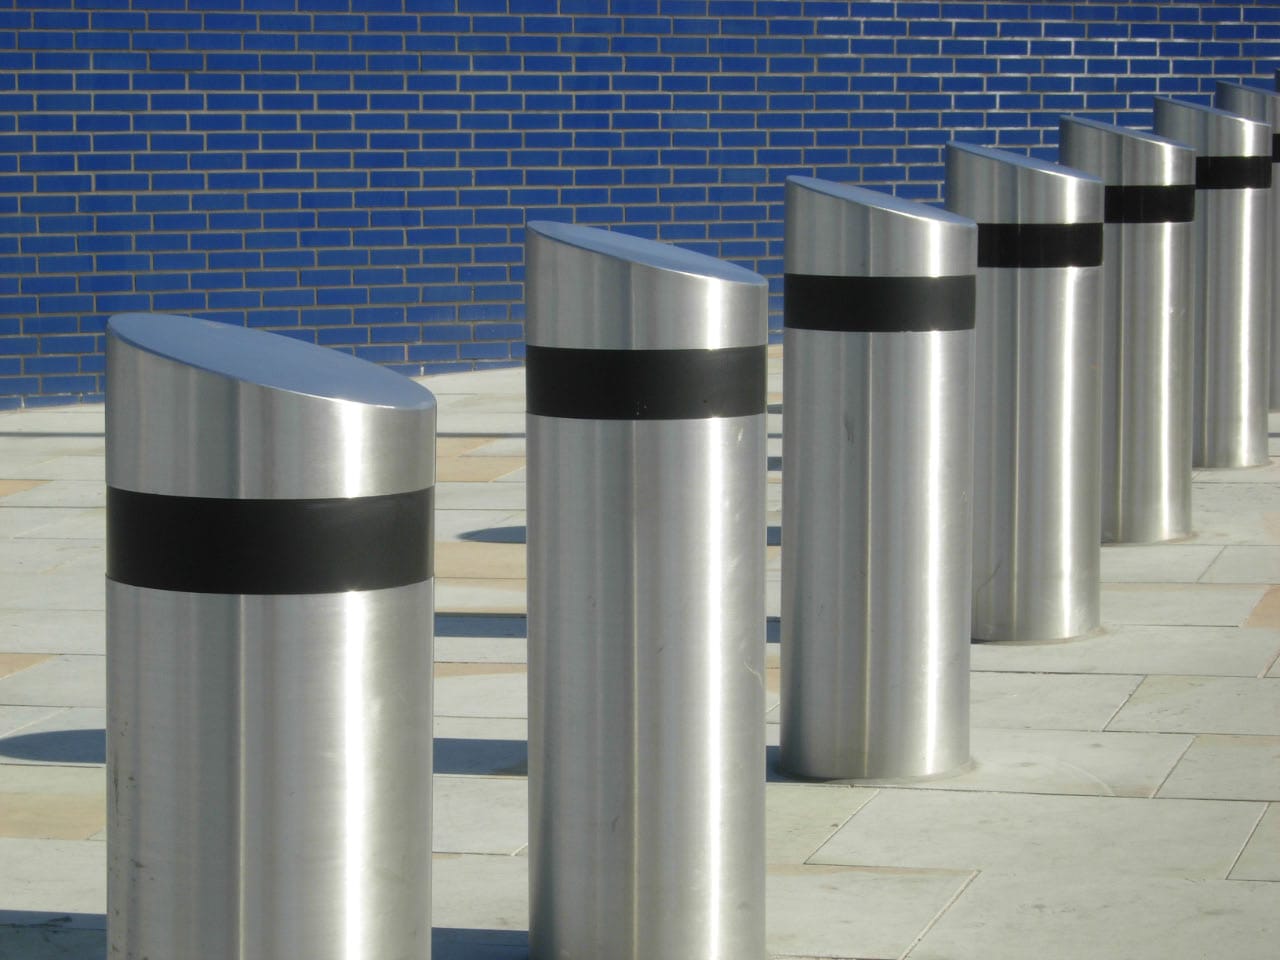 Neatly installed stainless steel city road bollards by Brooklynz metal works Singapore